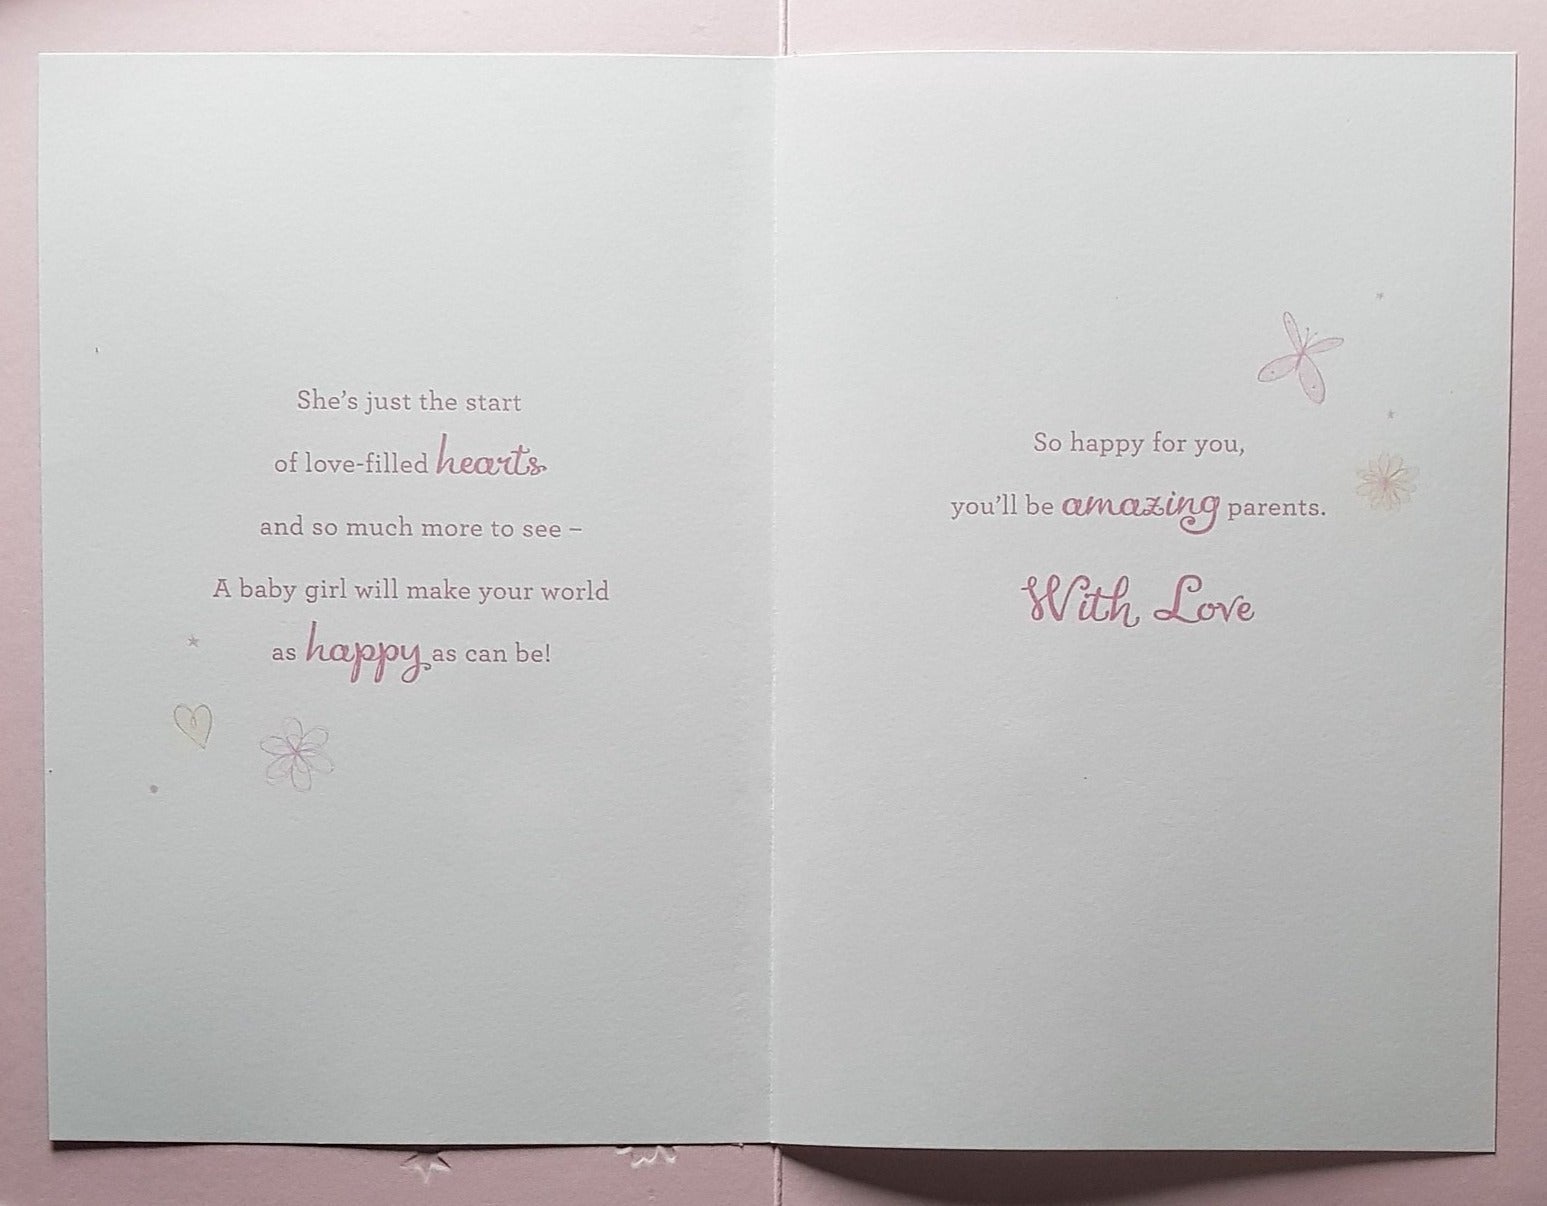 New Baby Card - Girl / Congratulations On The Birth Of Your Daughter